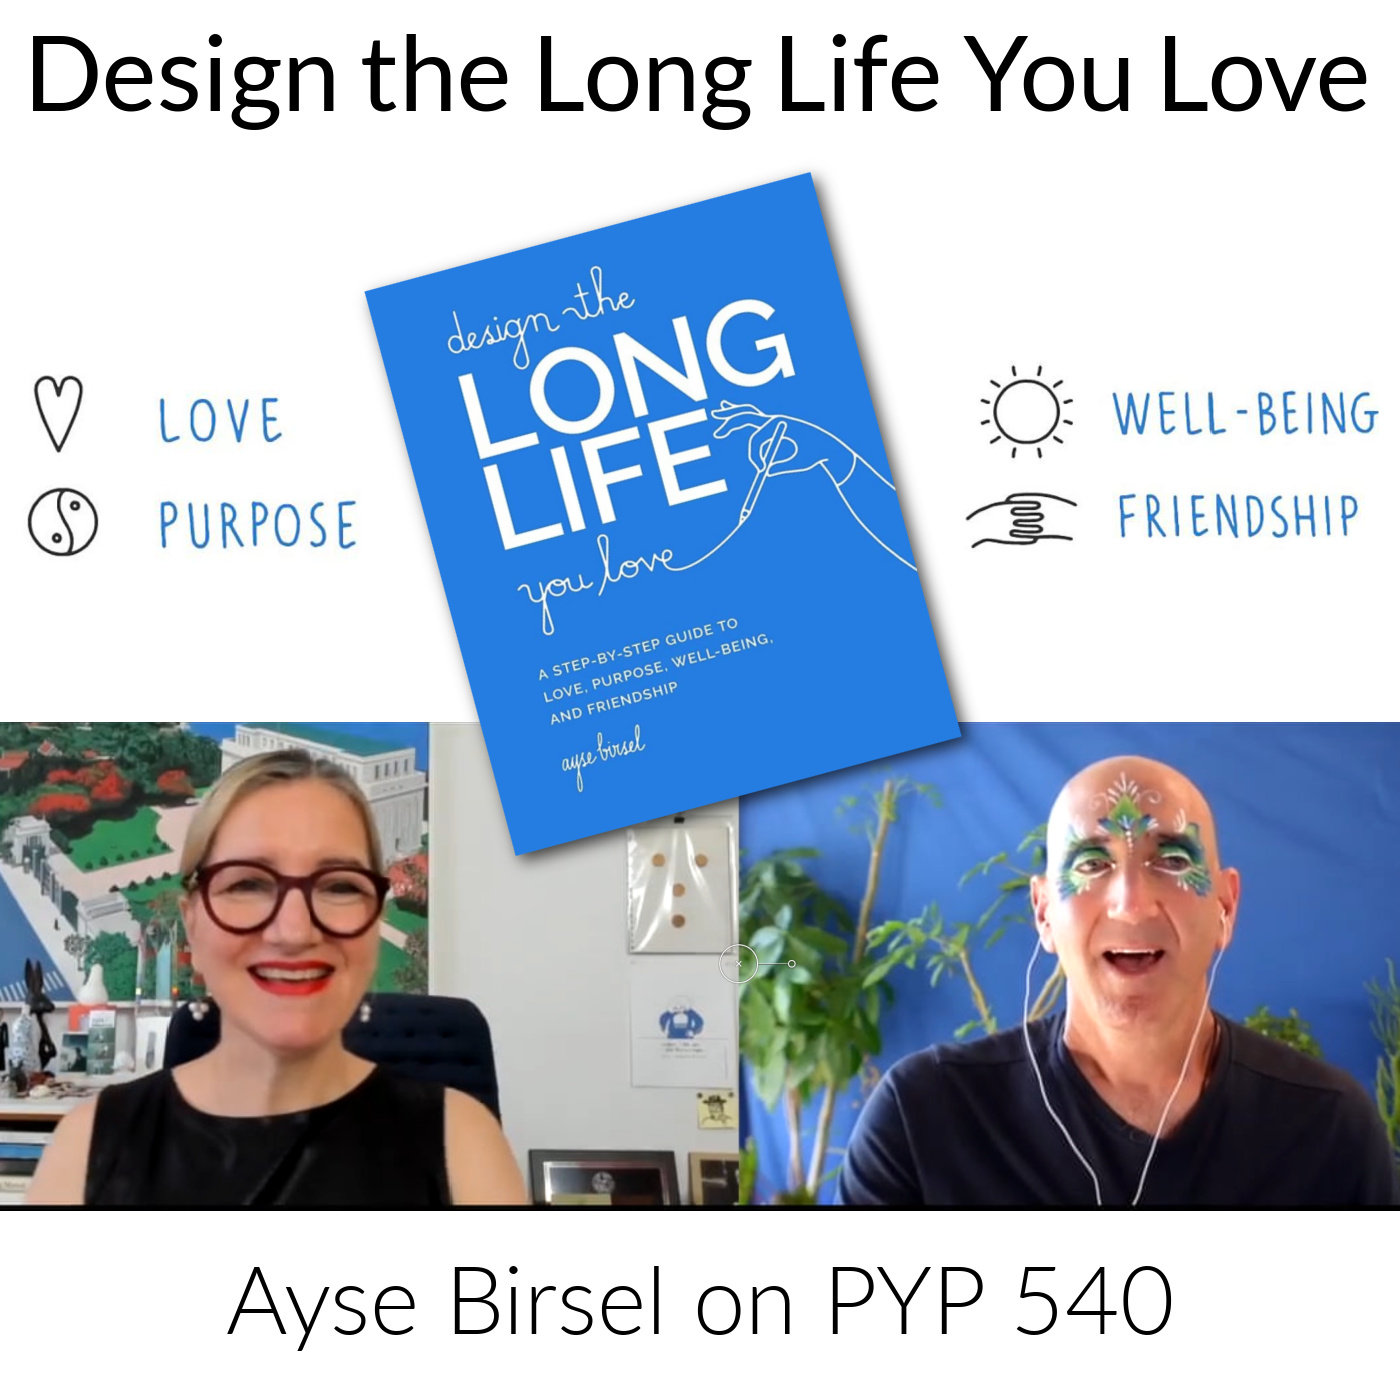 Design the Long Life You Love: Ayse Birsel on PYP 540